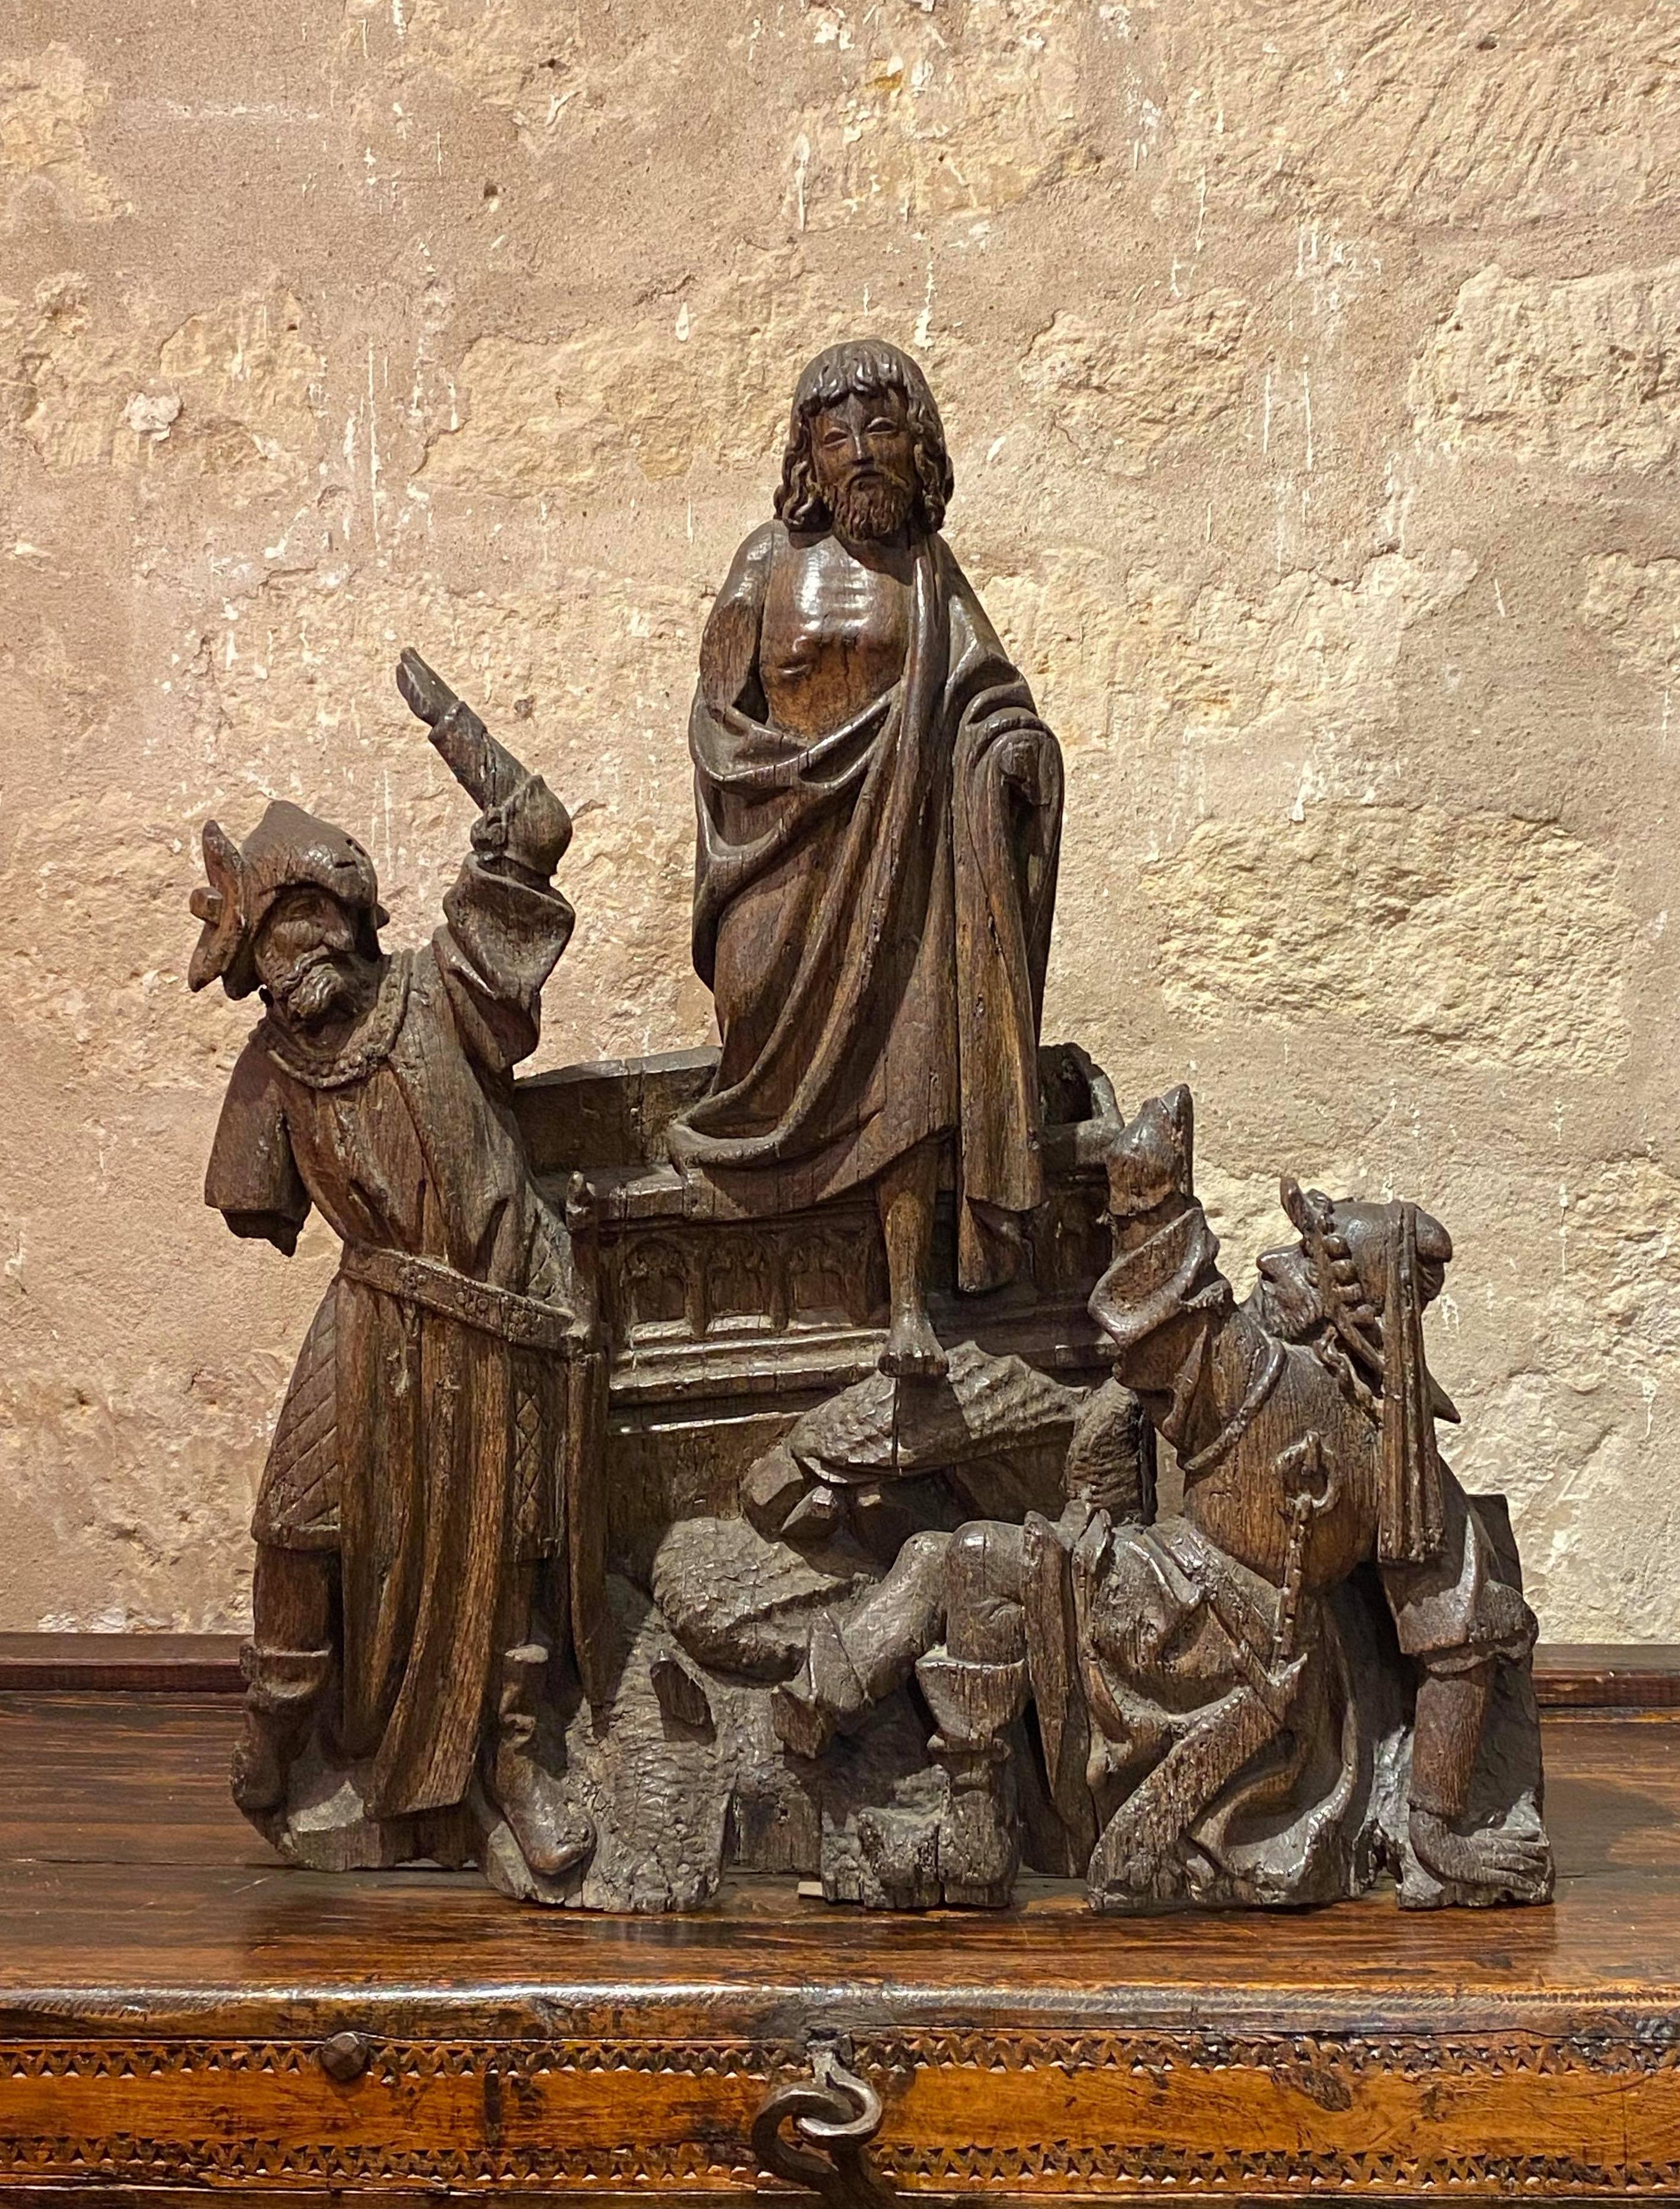 Carved wood depicting the resurrection of Christ

ORIGIN : SOUTHERN NETHERLANDS, ANTWERP
PERIOD : EARLY 16th CENTURY

Height : 67.5 cm
Length : 57 cm

Oakwood

Provenance : Collection of Maurice Larminet (1883-1968),